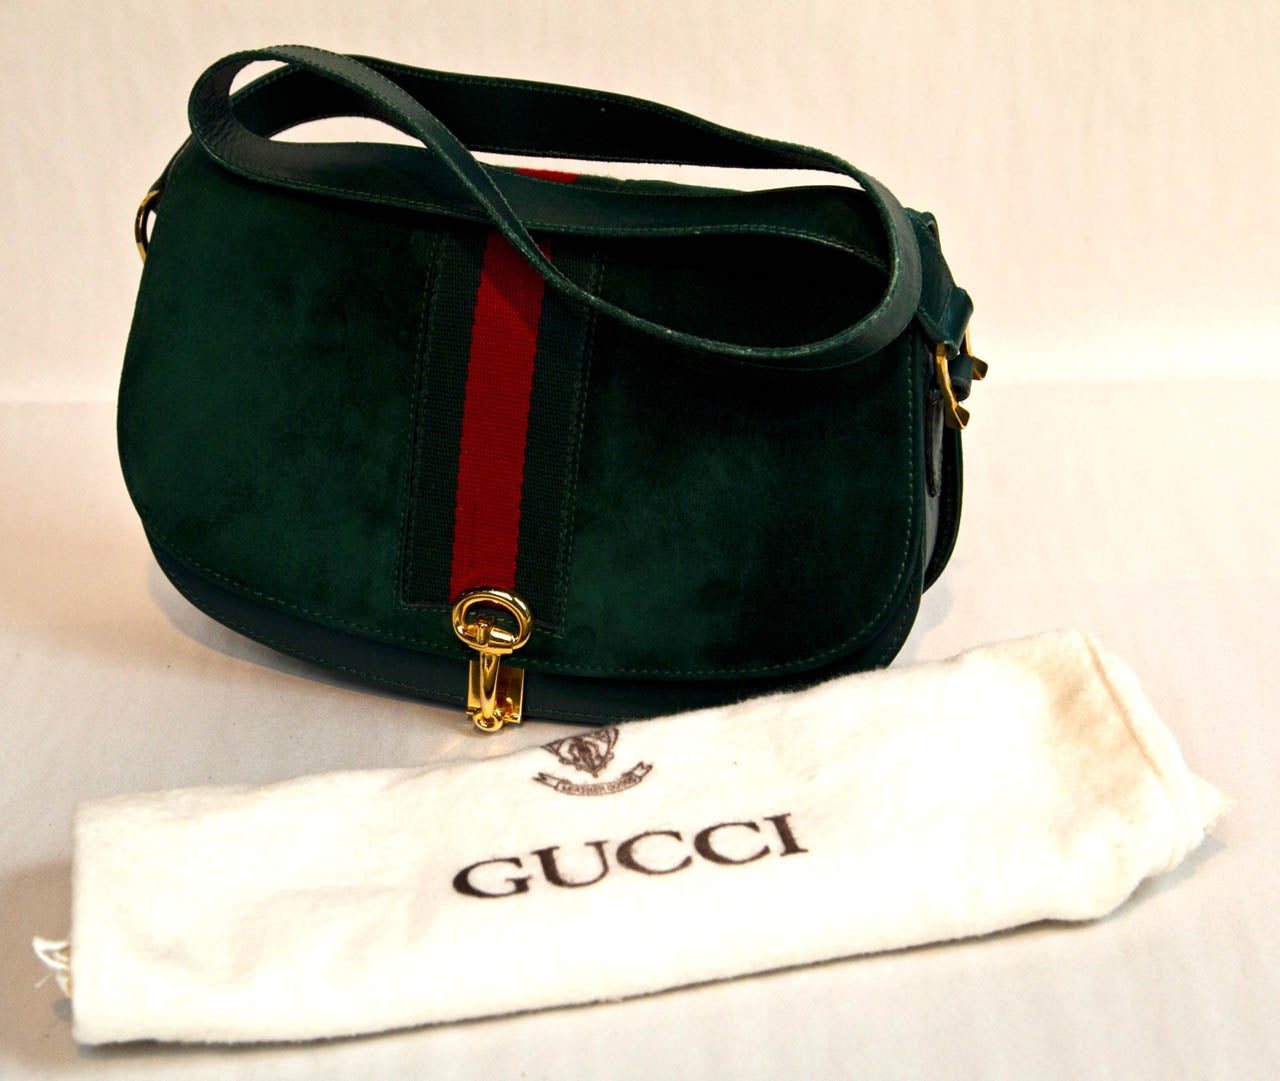 Gucci Messenger Purse With Racing Stripe 1